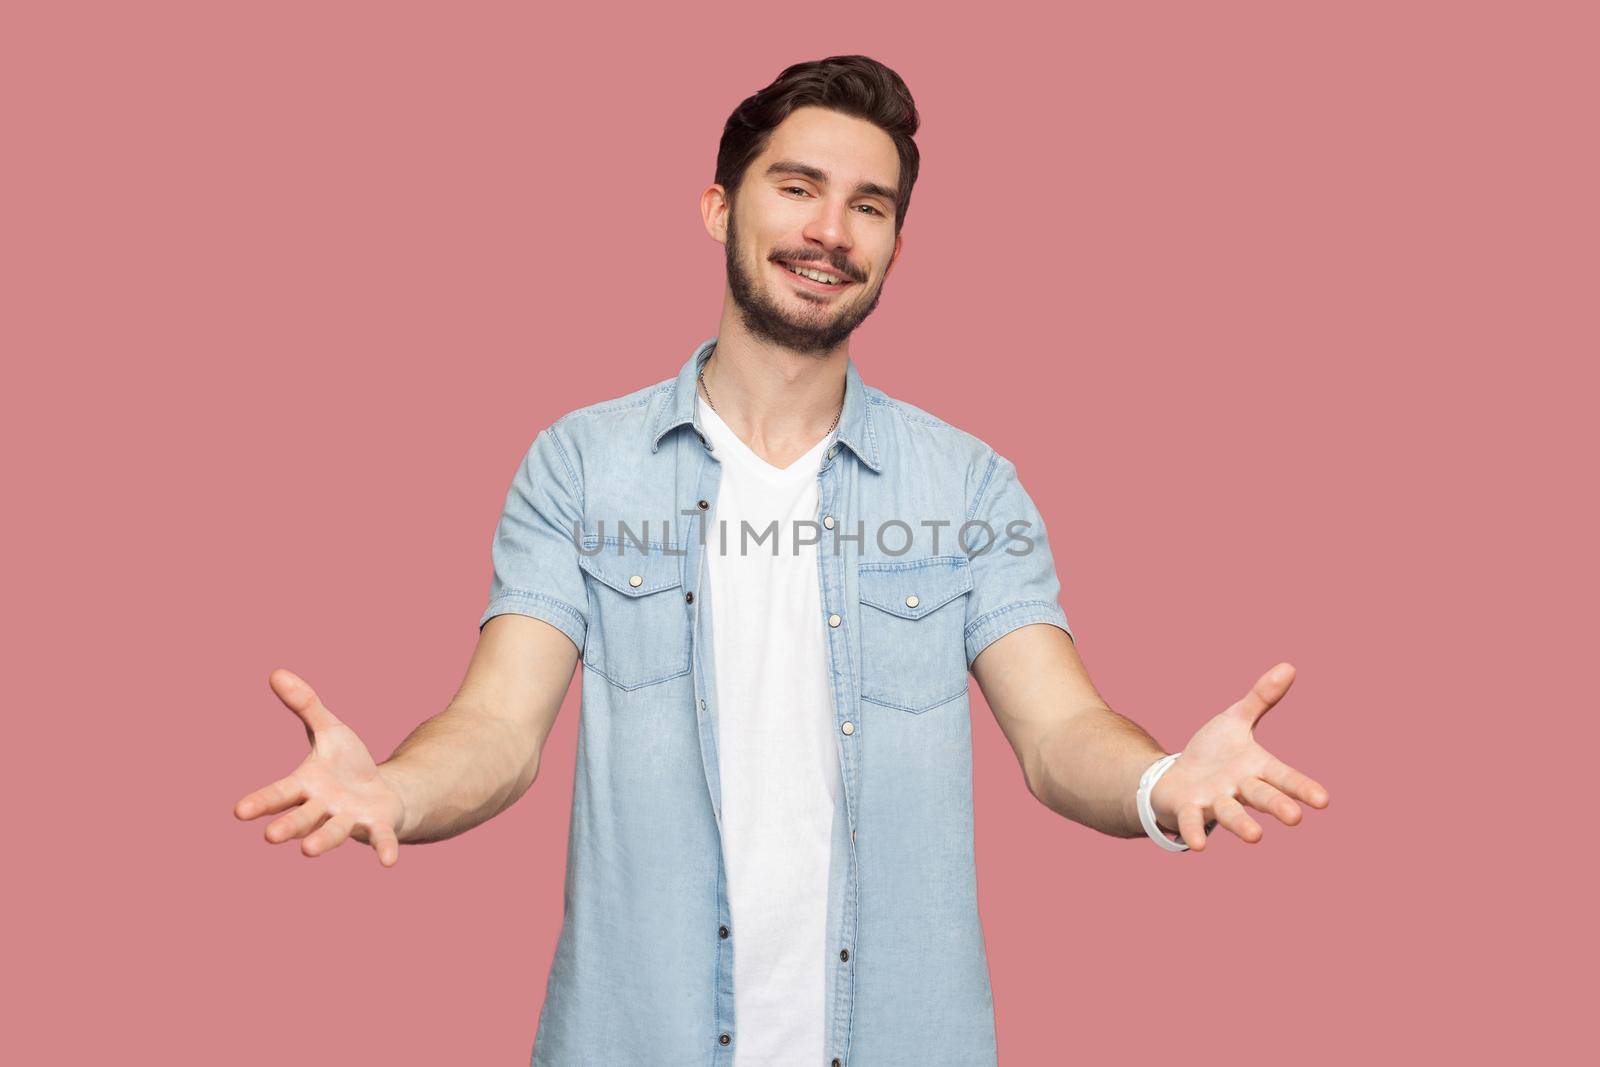 Portrait of happy handsome bearded young man in blue casual style shirt standing with raised arms and looking at camera with toothy smile. indoor studio shot, isolated on pink background.